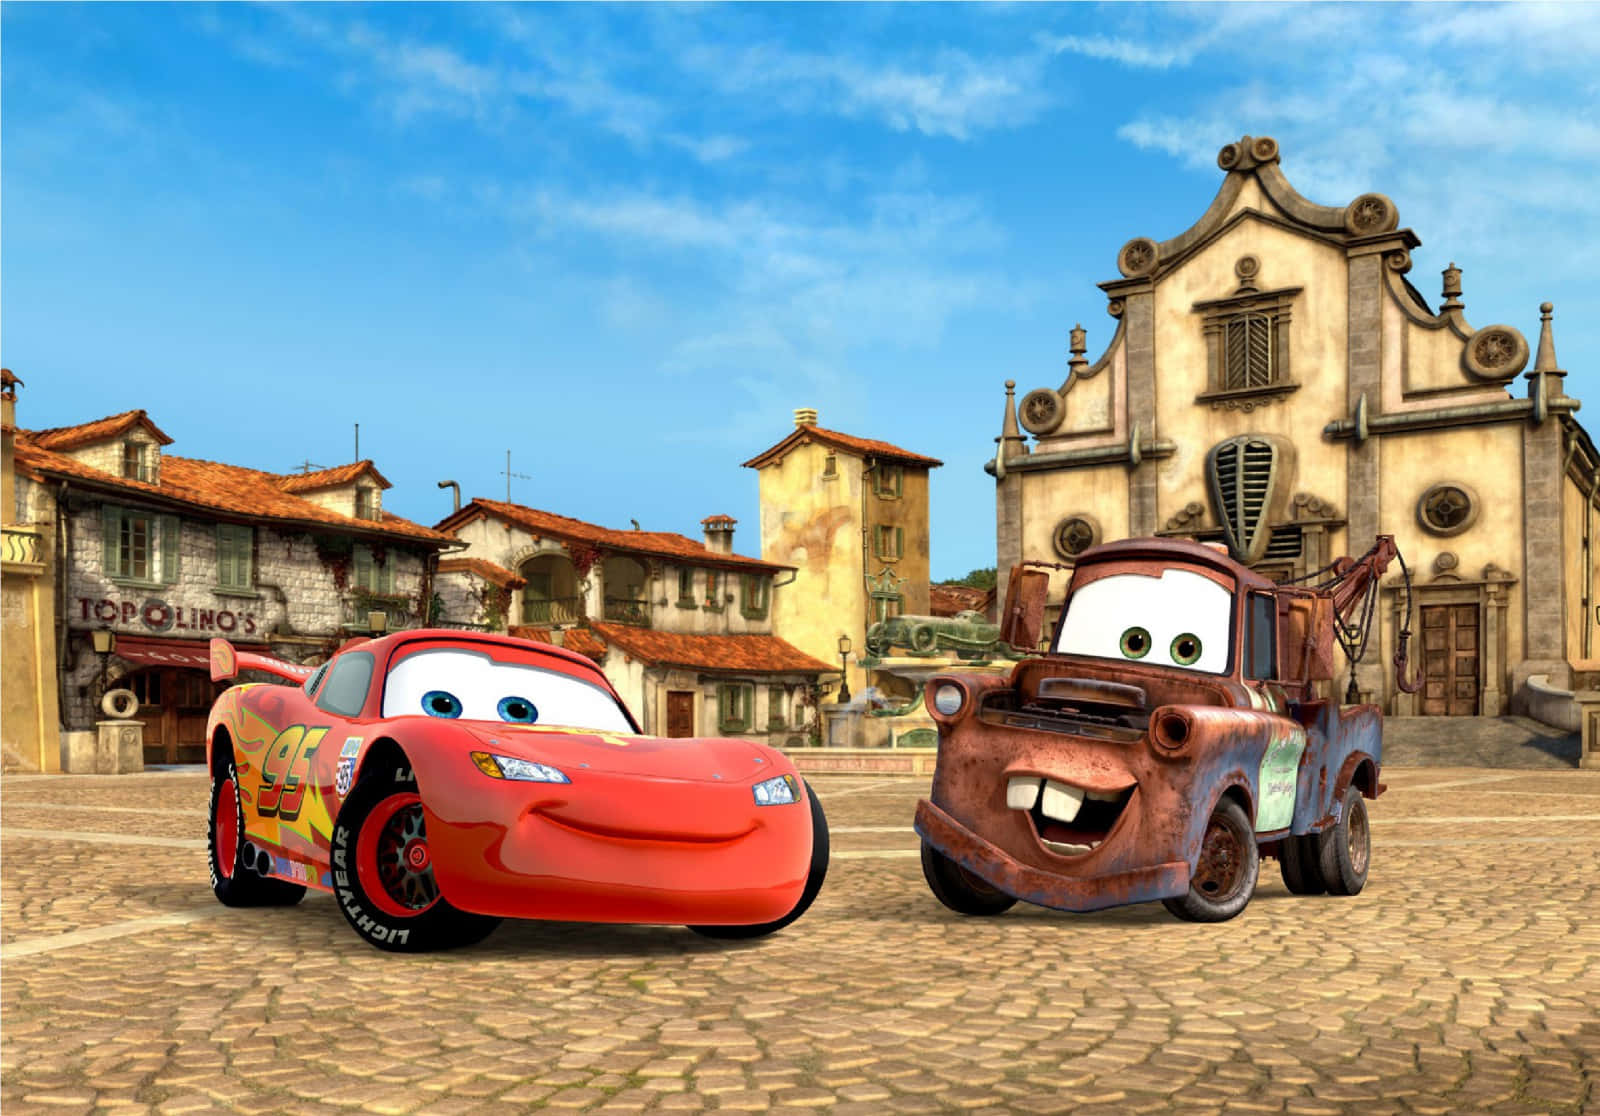 Lightning McQueen And Mater Return In “Cars On The Road,” Hits Disney+  September 8th